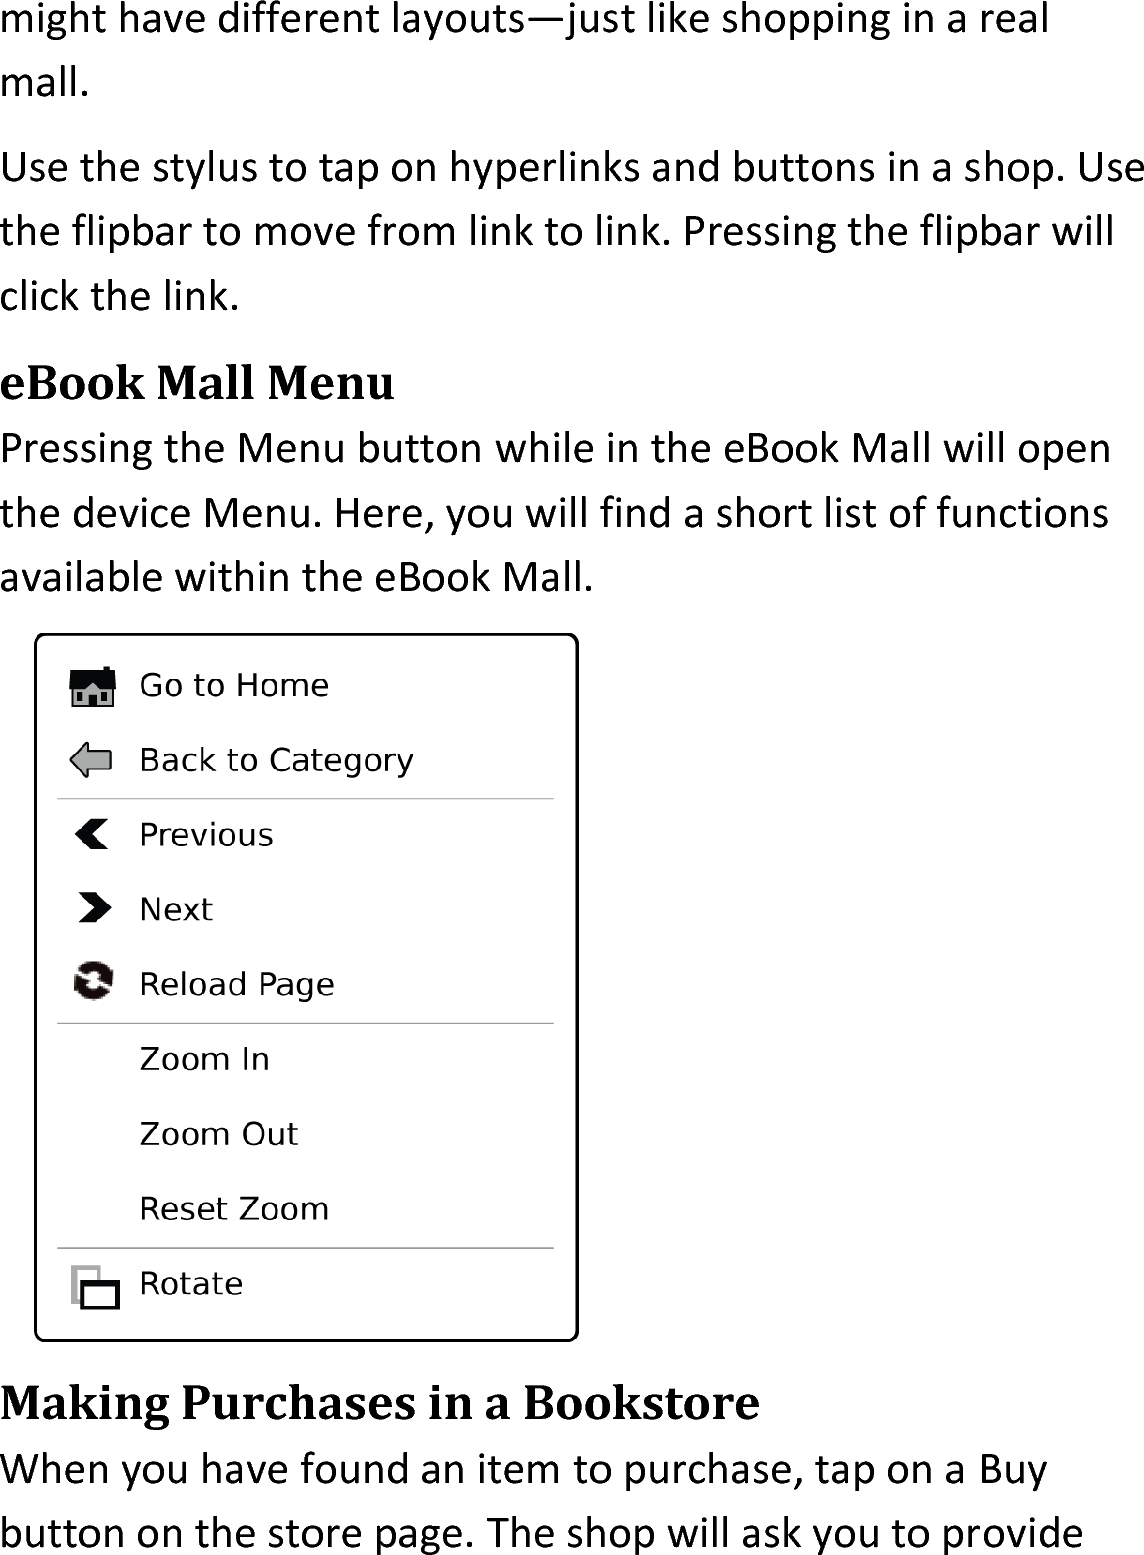 might have different layouts—just like shopping in a real mall.Use the stylus to tap on hyperlinks and buttons in a shop. Use the flipbar to move from link to link. Pressing the flipbar will click the link.eBook Mall MenuPressing the Menu button while in the eBook Mall will open the device Menu. Here, you will find a short list of functions available within the eBook Mall. Making Purchases in a BookstoreWhen you have found an item to purchase, tap on a Buy button on the store page. The shop will ask you to provide 